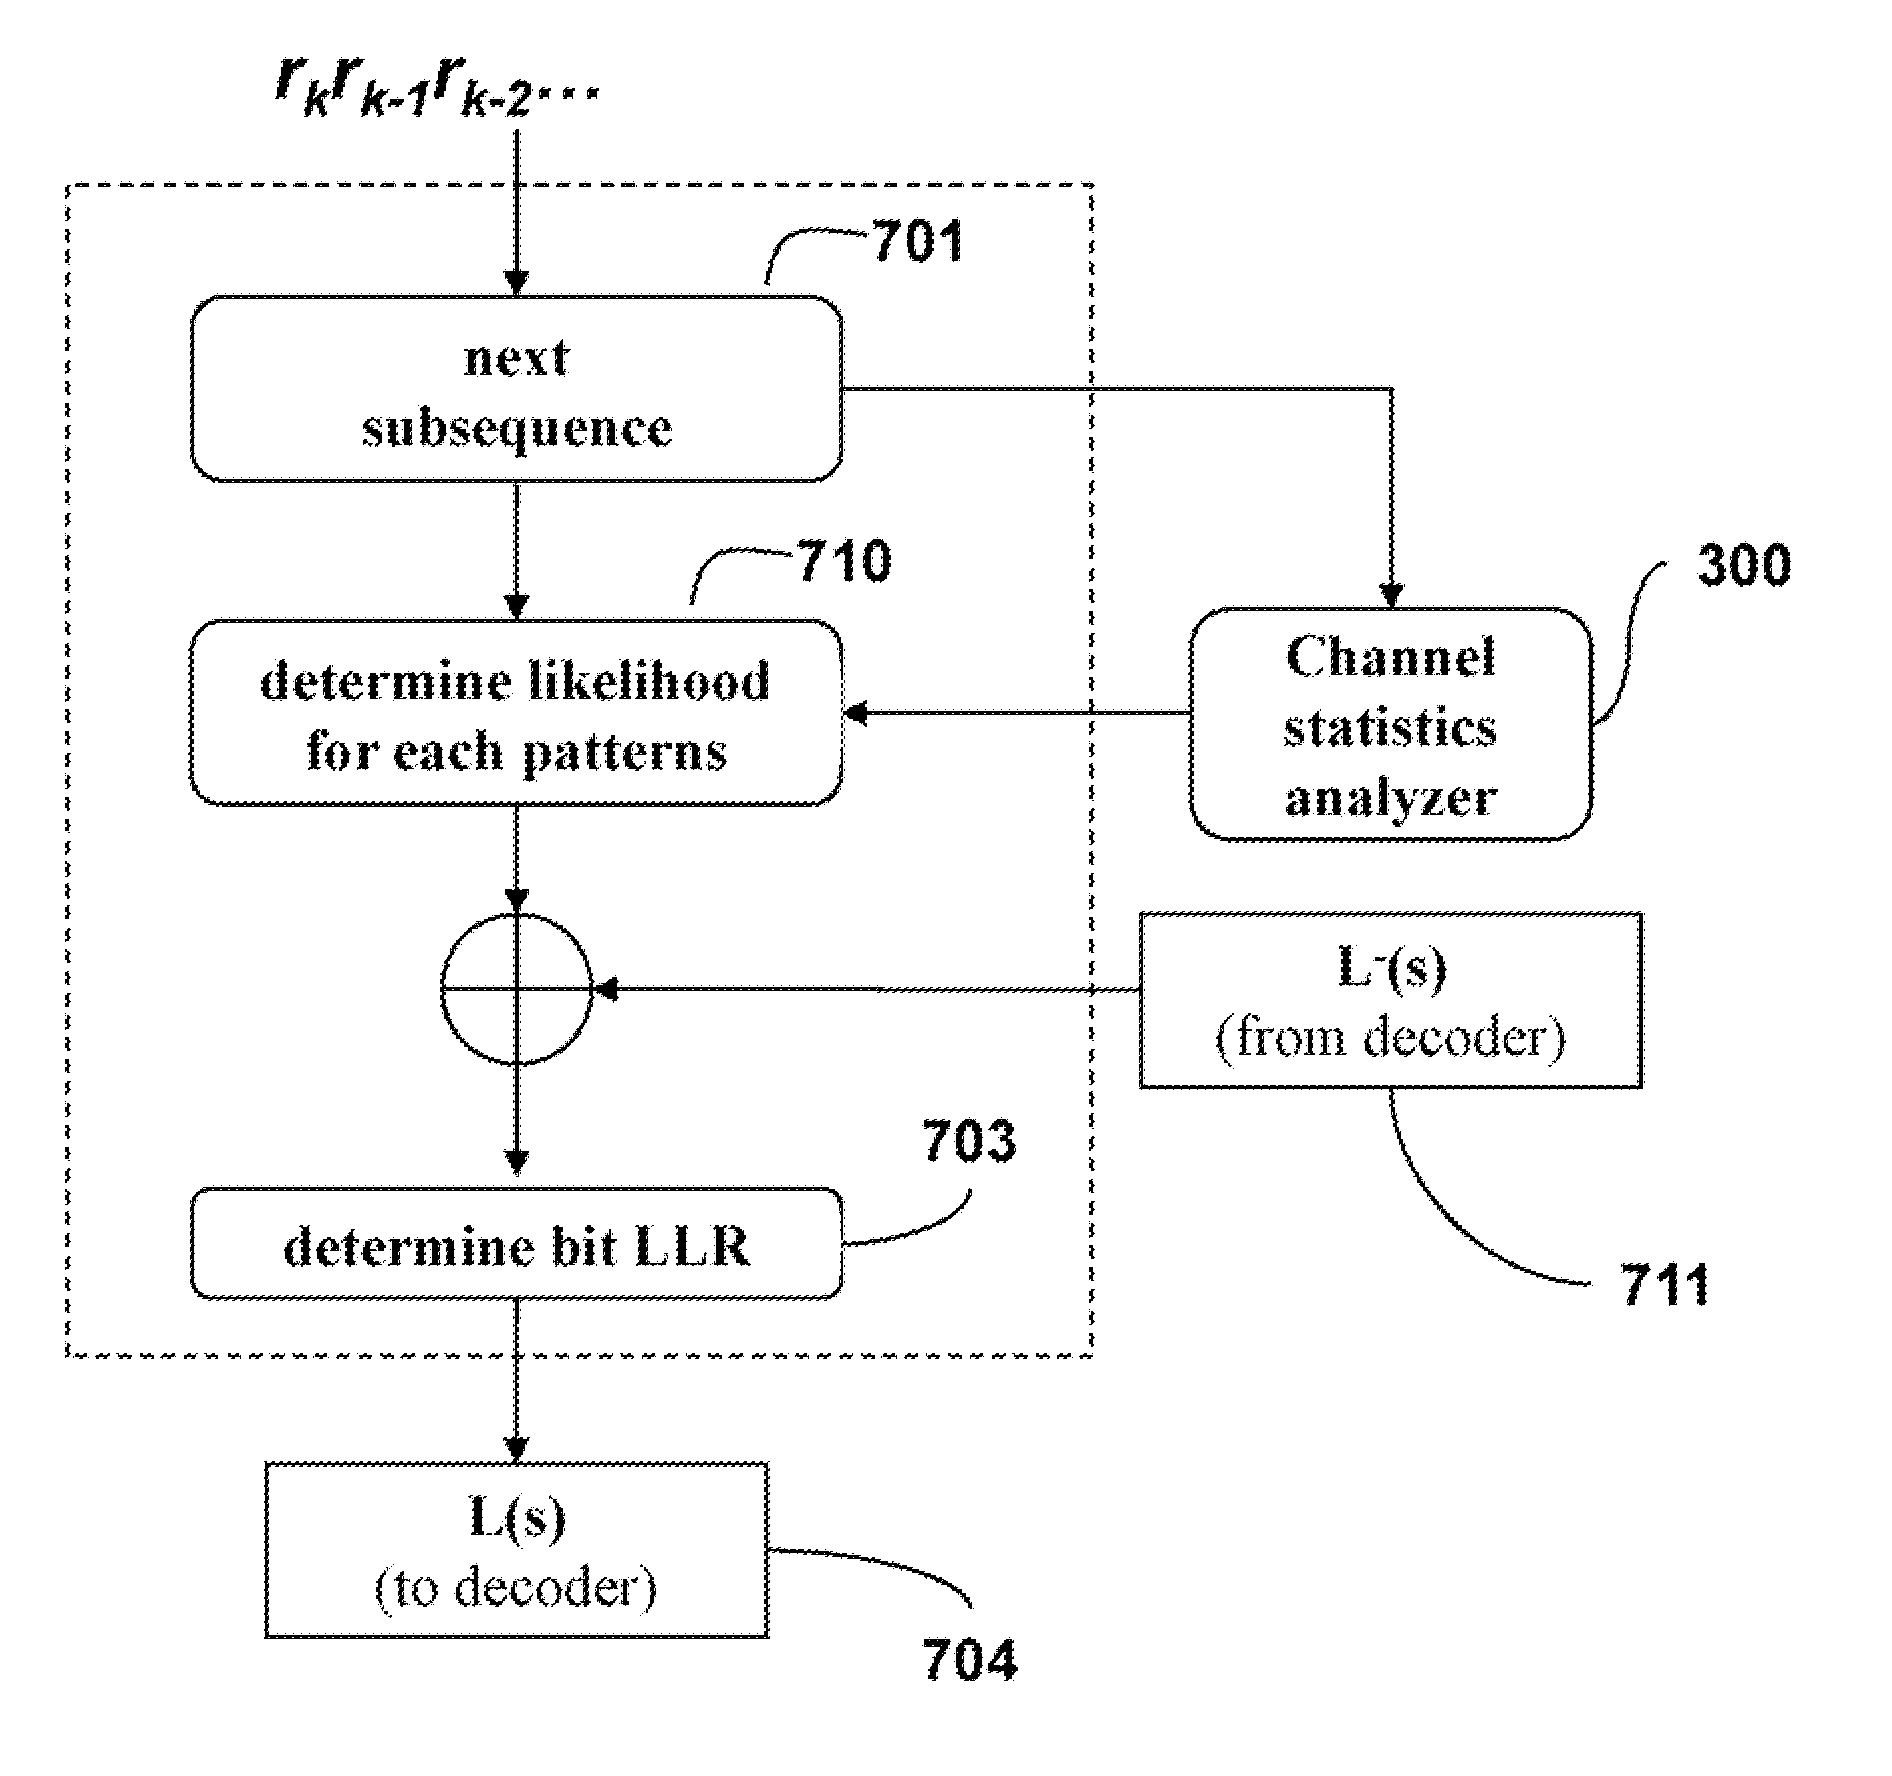 Method and System for Equalization and Decoding Received Signals Based on High-Order Statistics in Optical Communication Networks